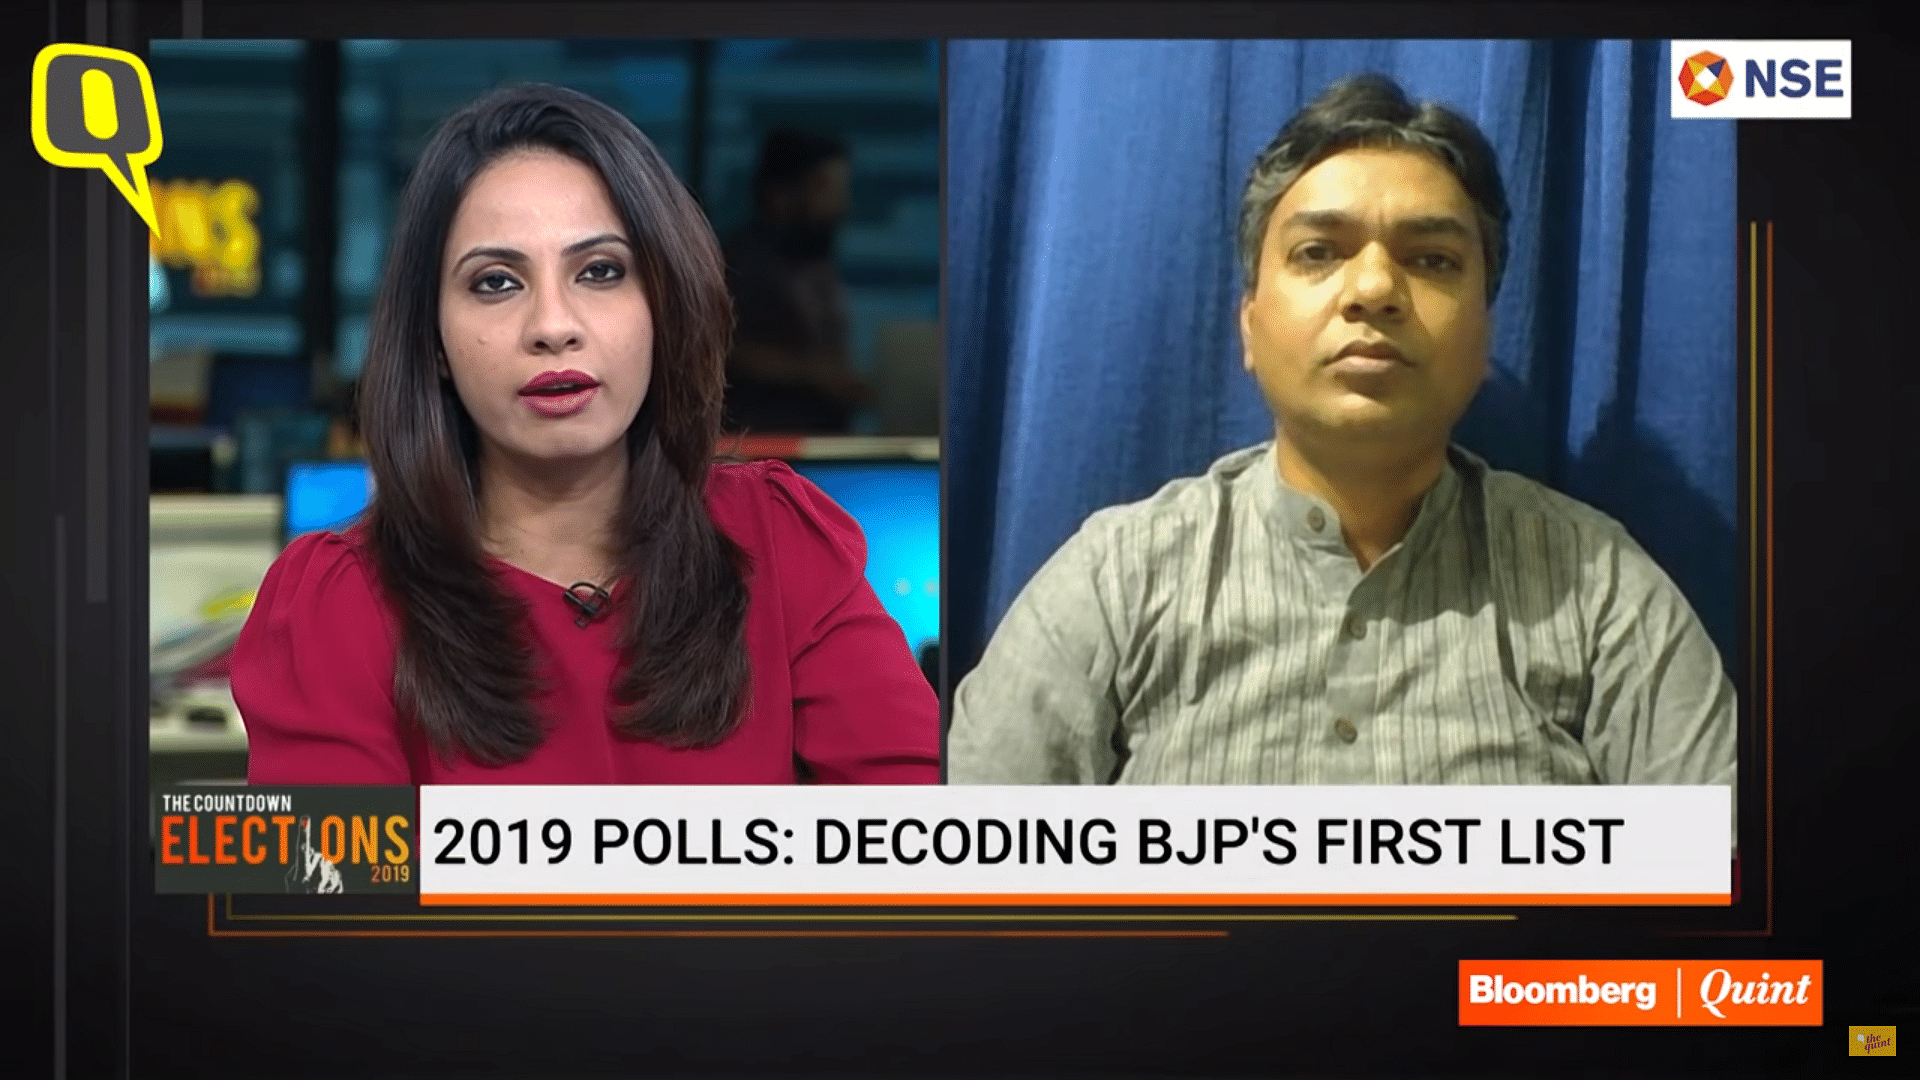 BJP’s candidate list was highly anticipated as it can help decode the party’s electoral strategy going into the crucial Lok Sabha elections.